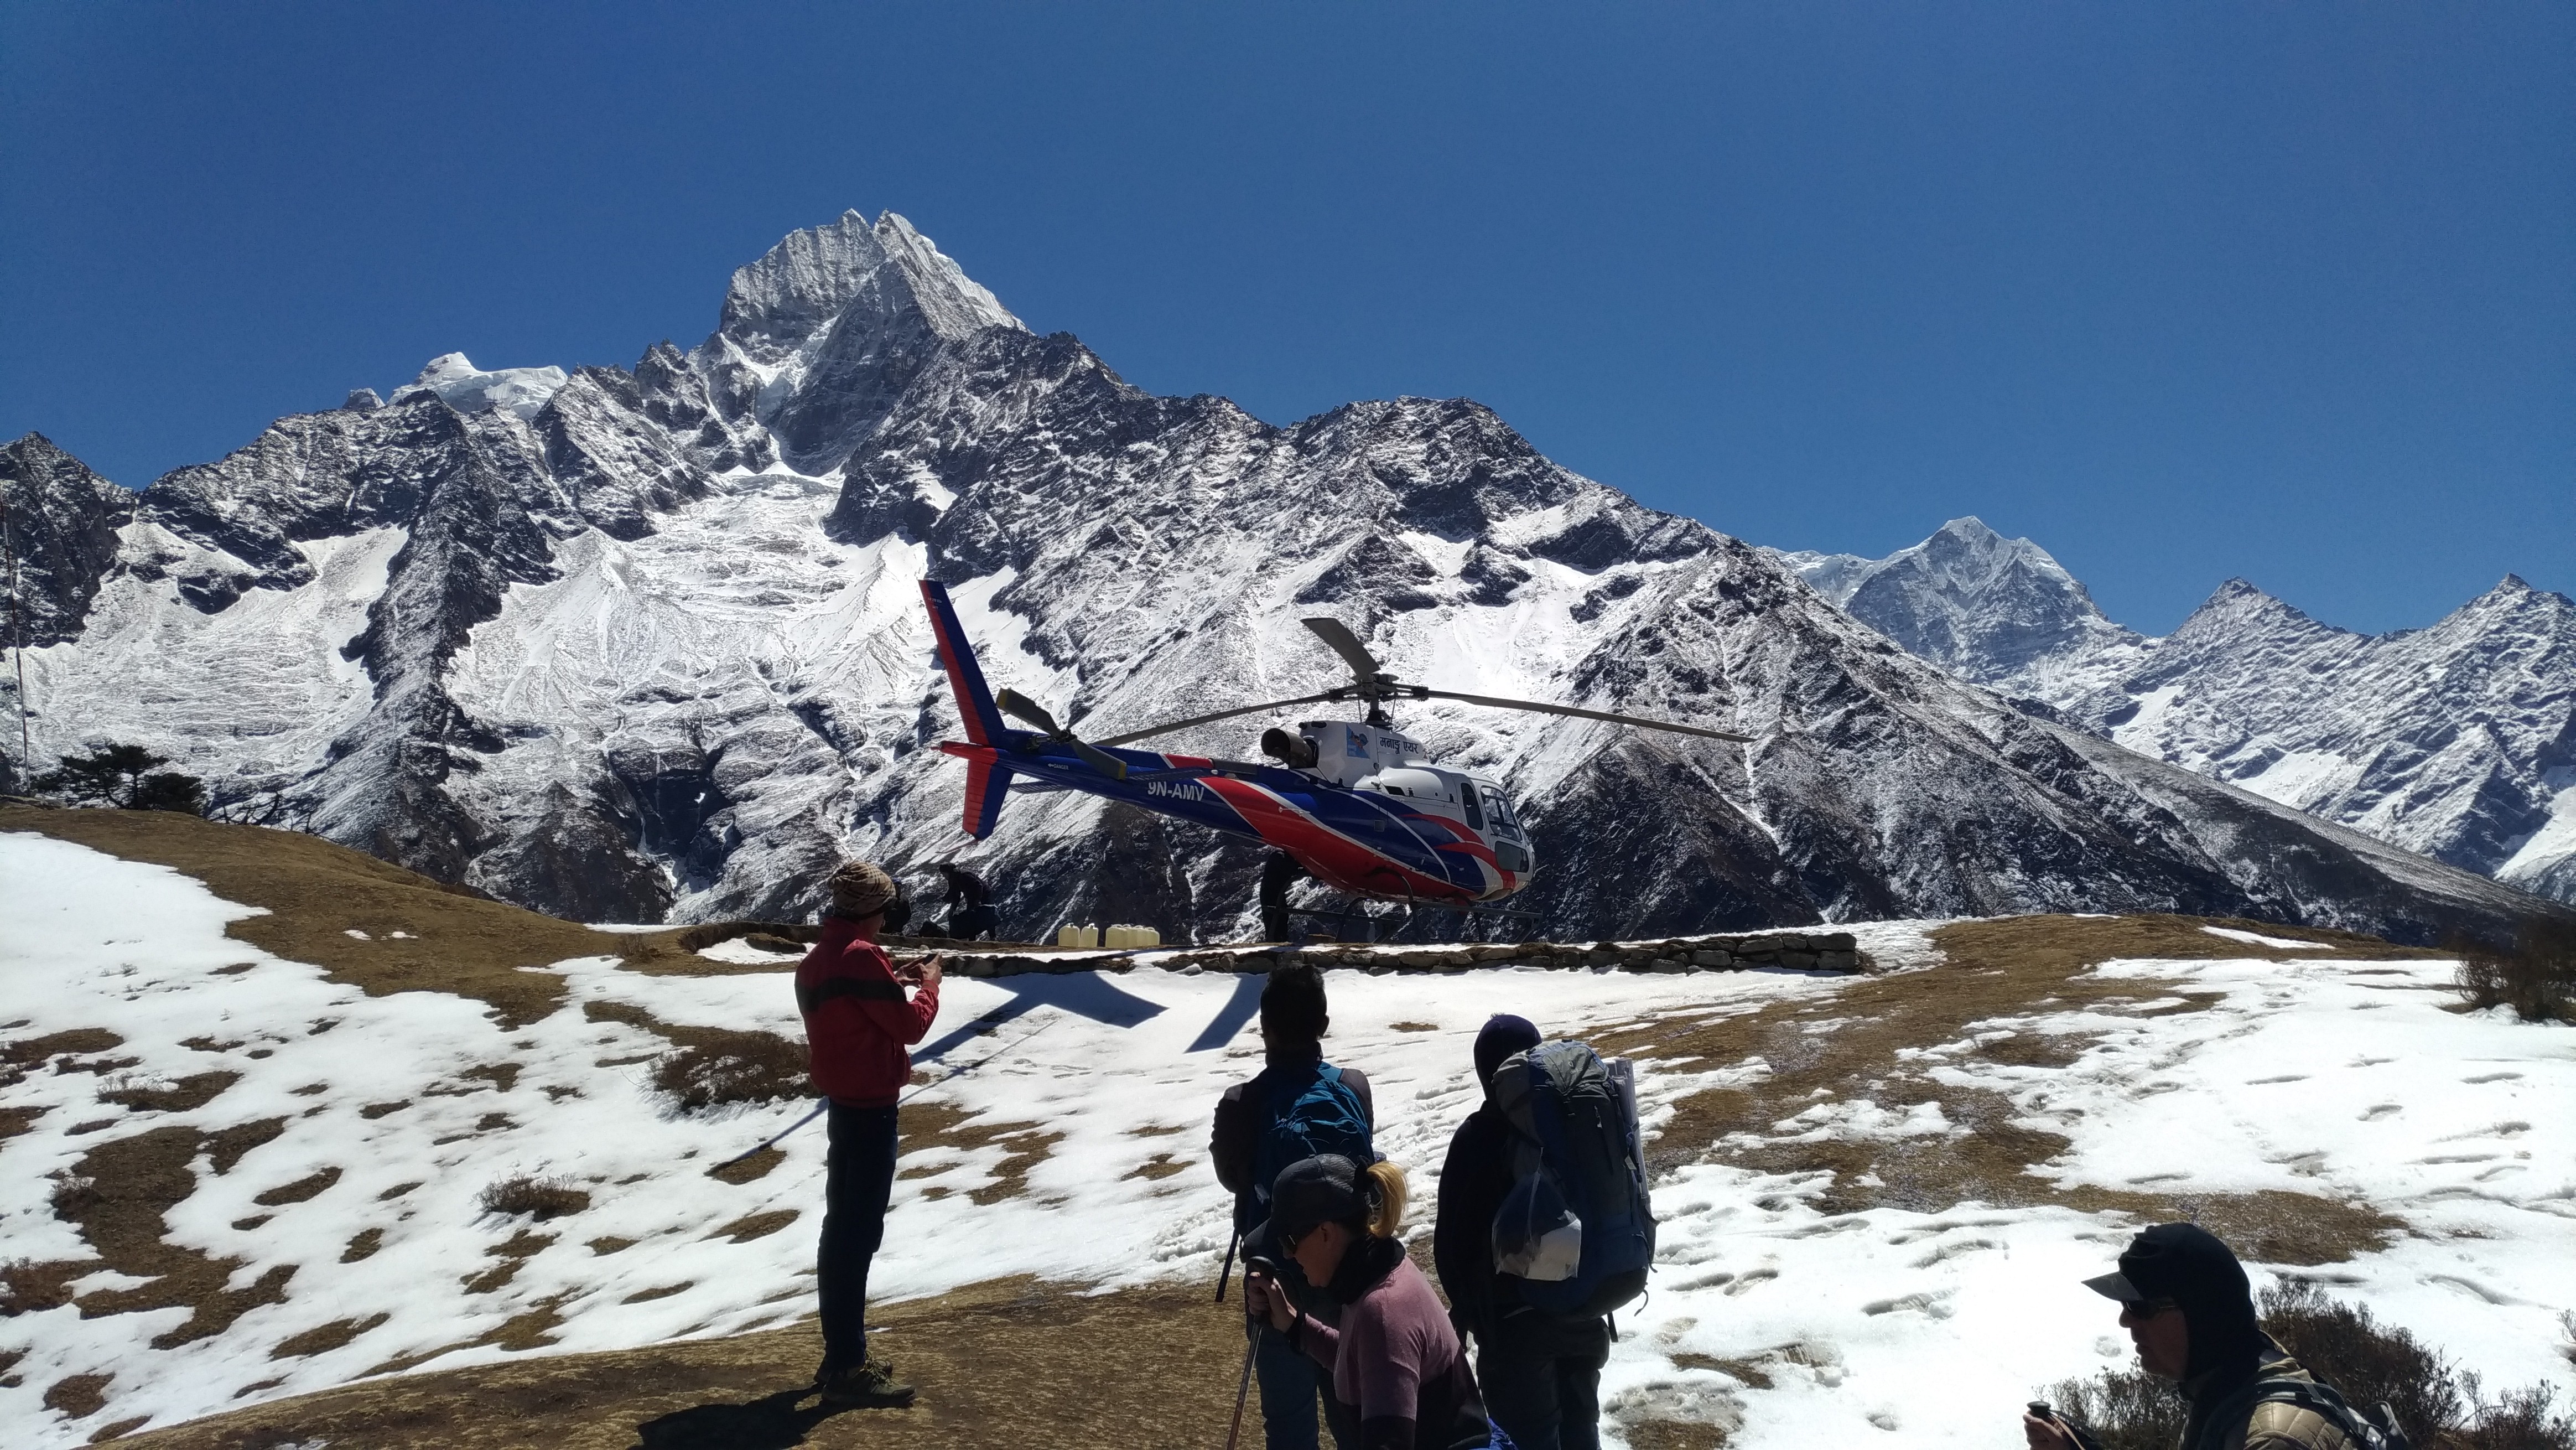 Annapurna Helicopter Tour - 1 Day